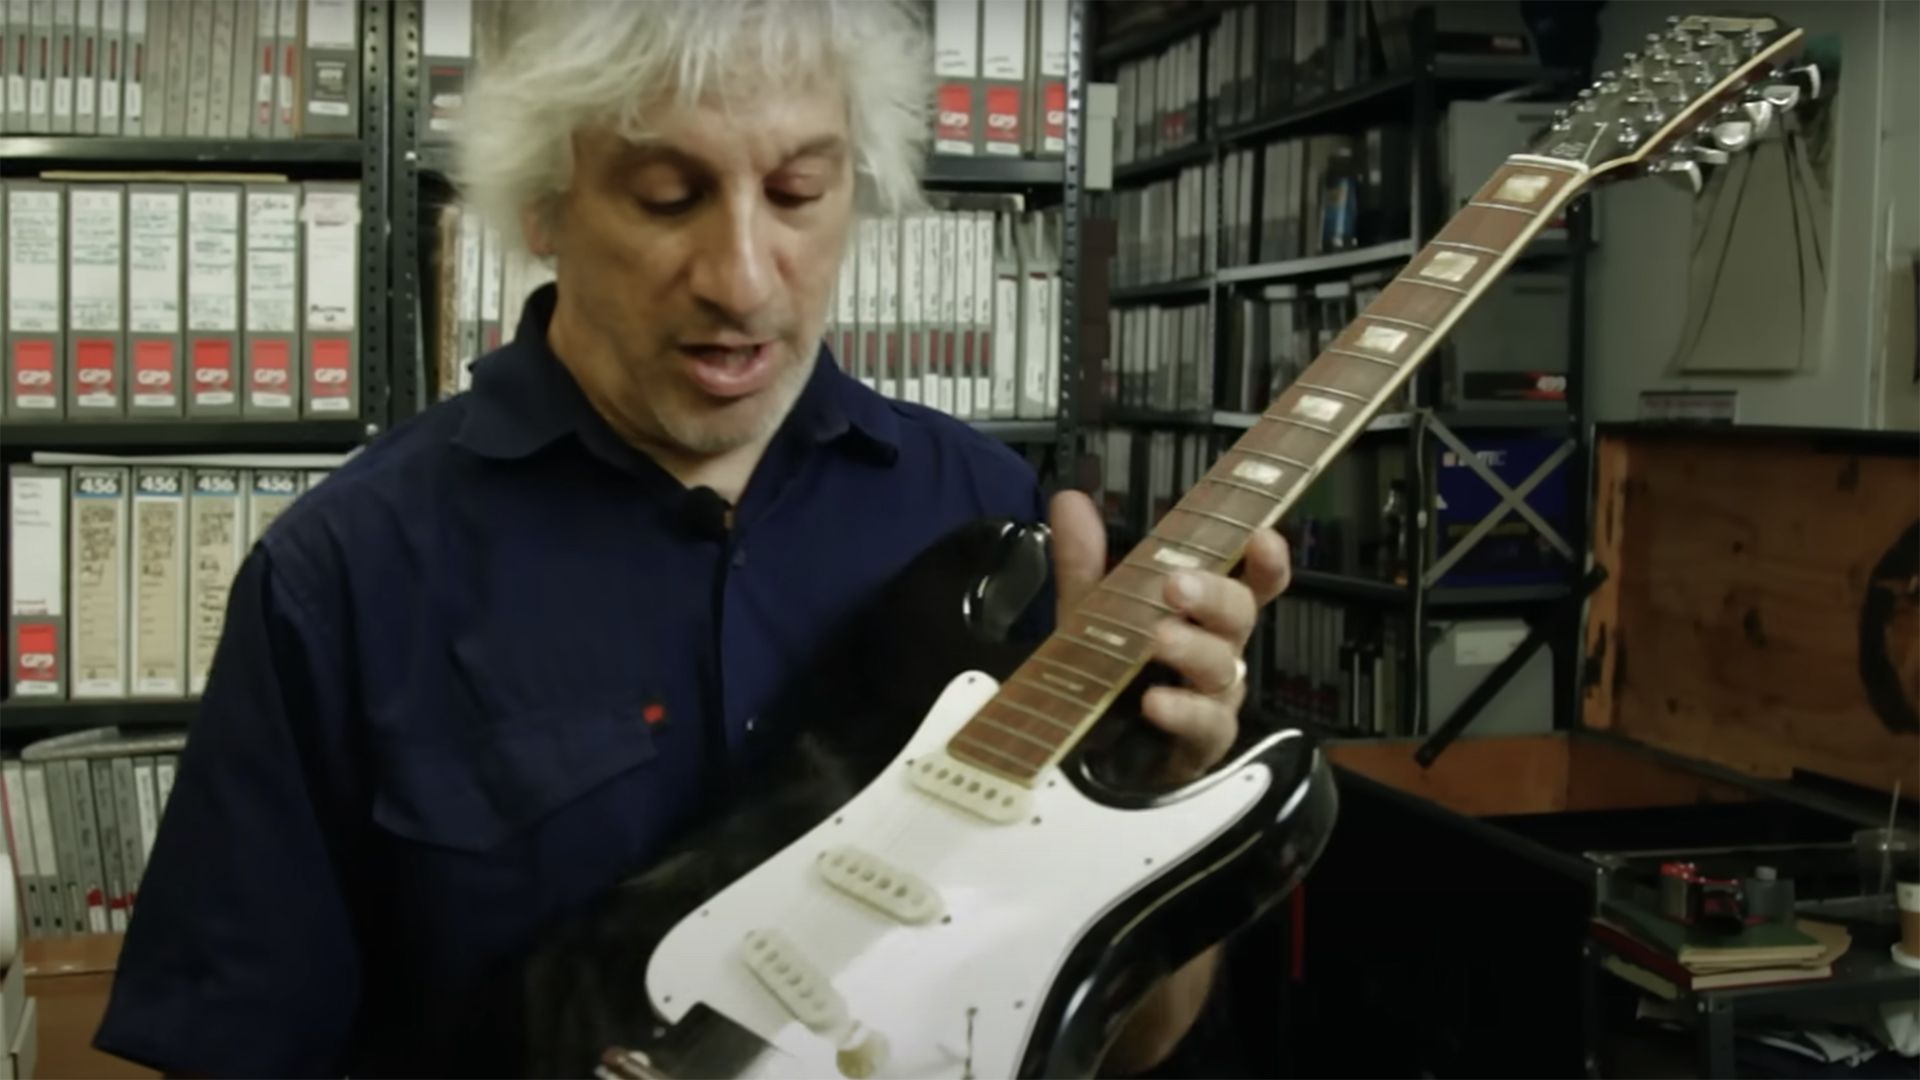 lee ranaldo remembers the time steve albini made sonic youth a guitar with 16 high e-strings –and an inlaid appendage